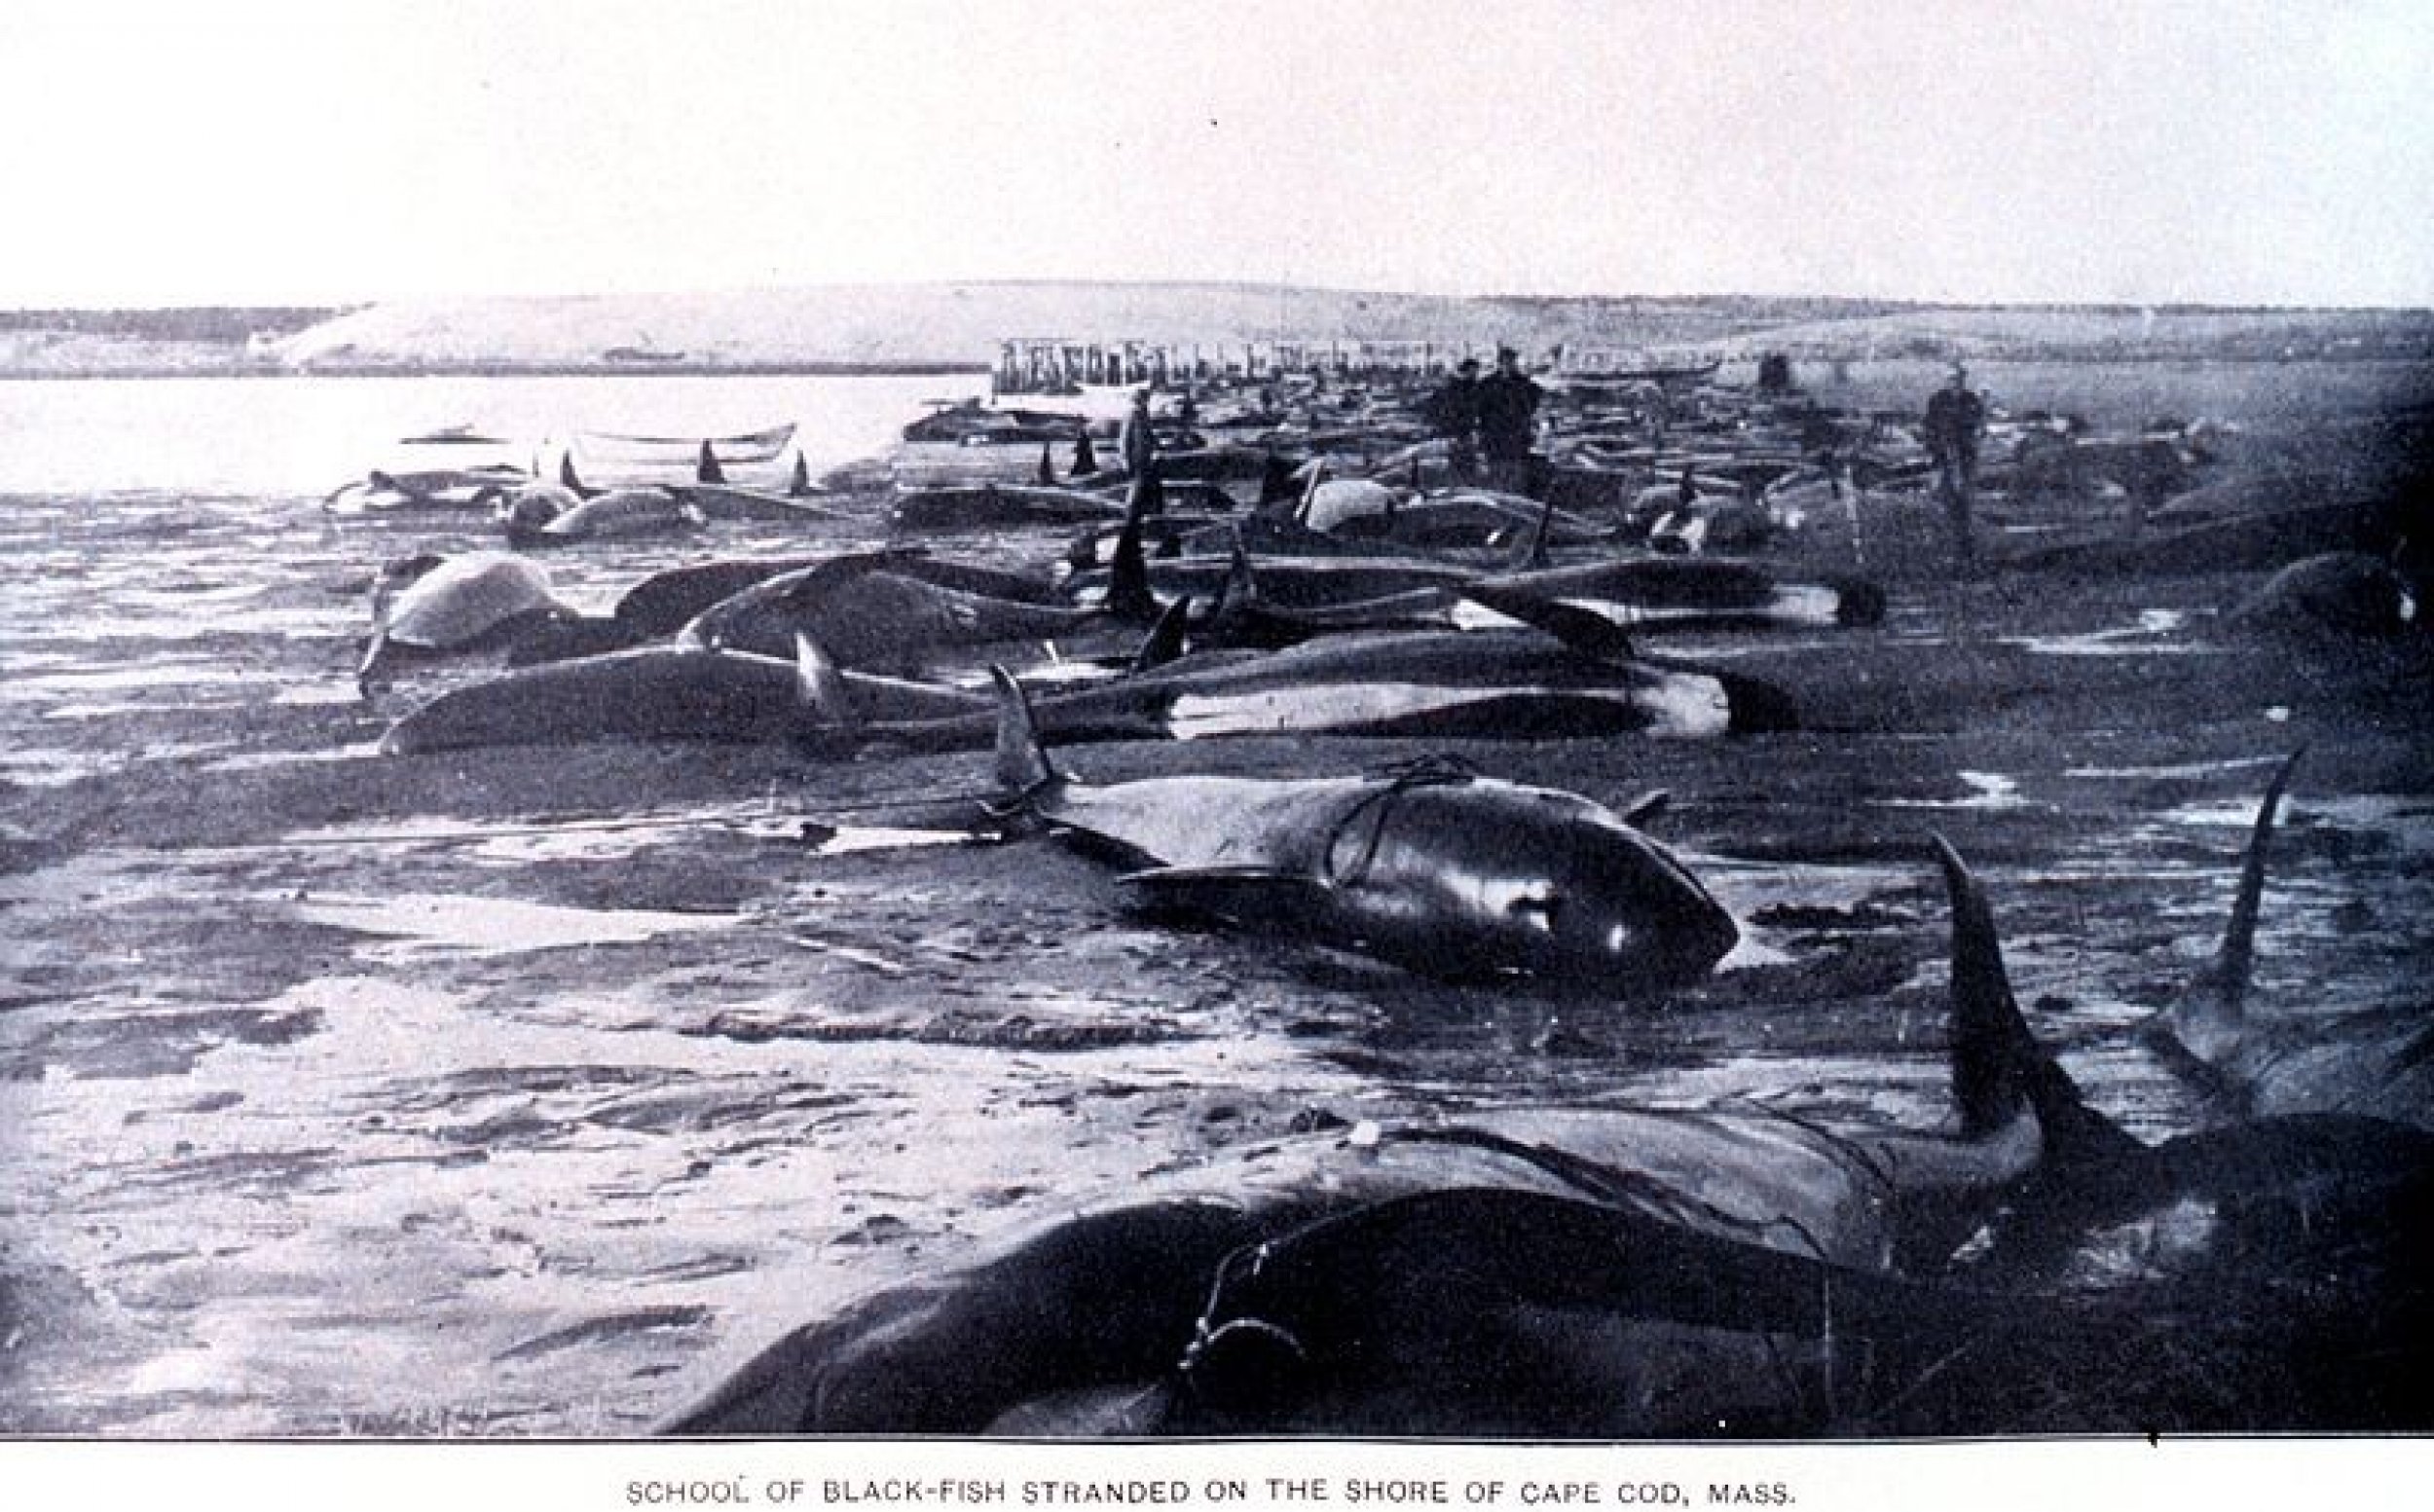 A mass stranding of Pilot Whales on the shore of Cape Cod, 1902